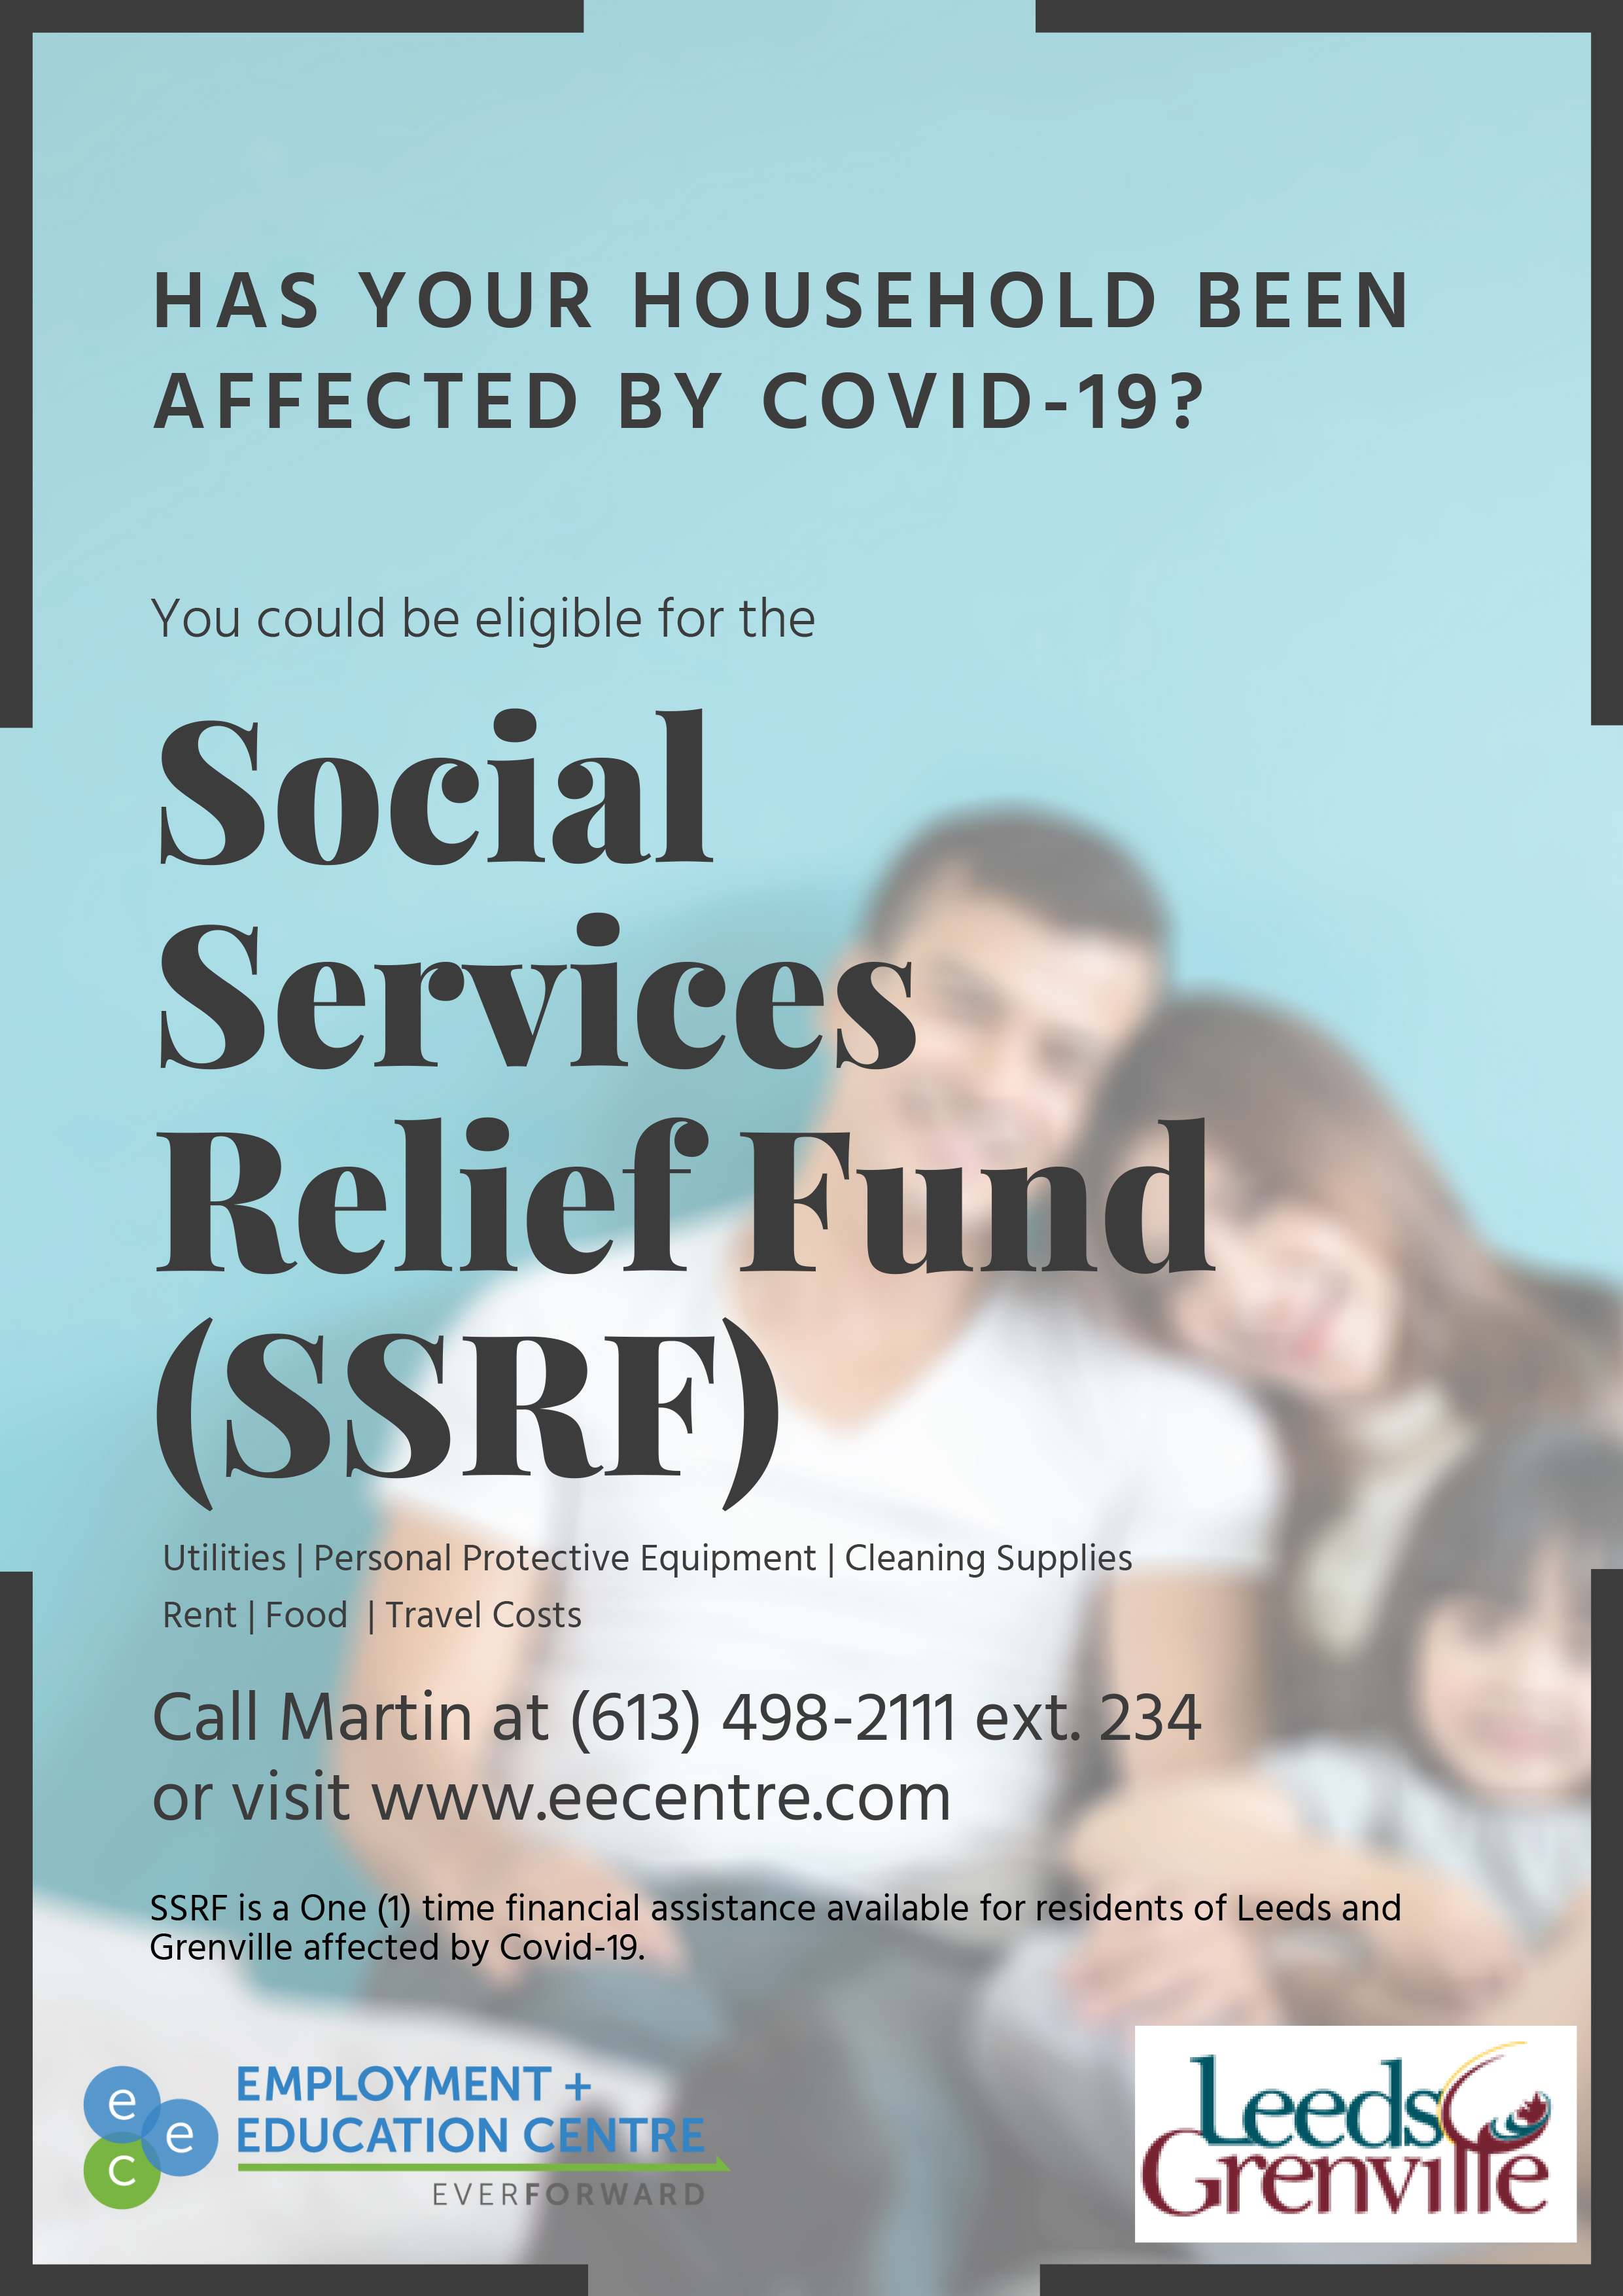 Are You Eligible for the Social Services Relief Fund?